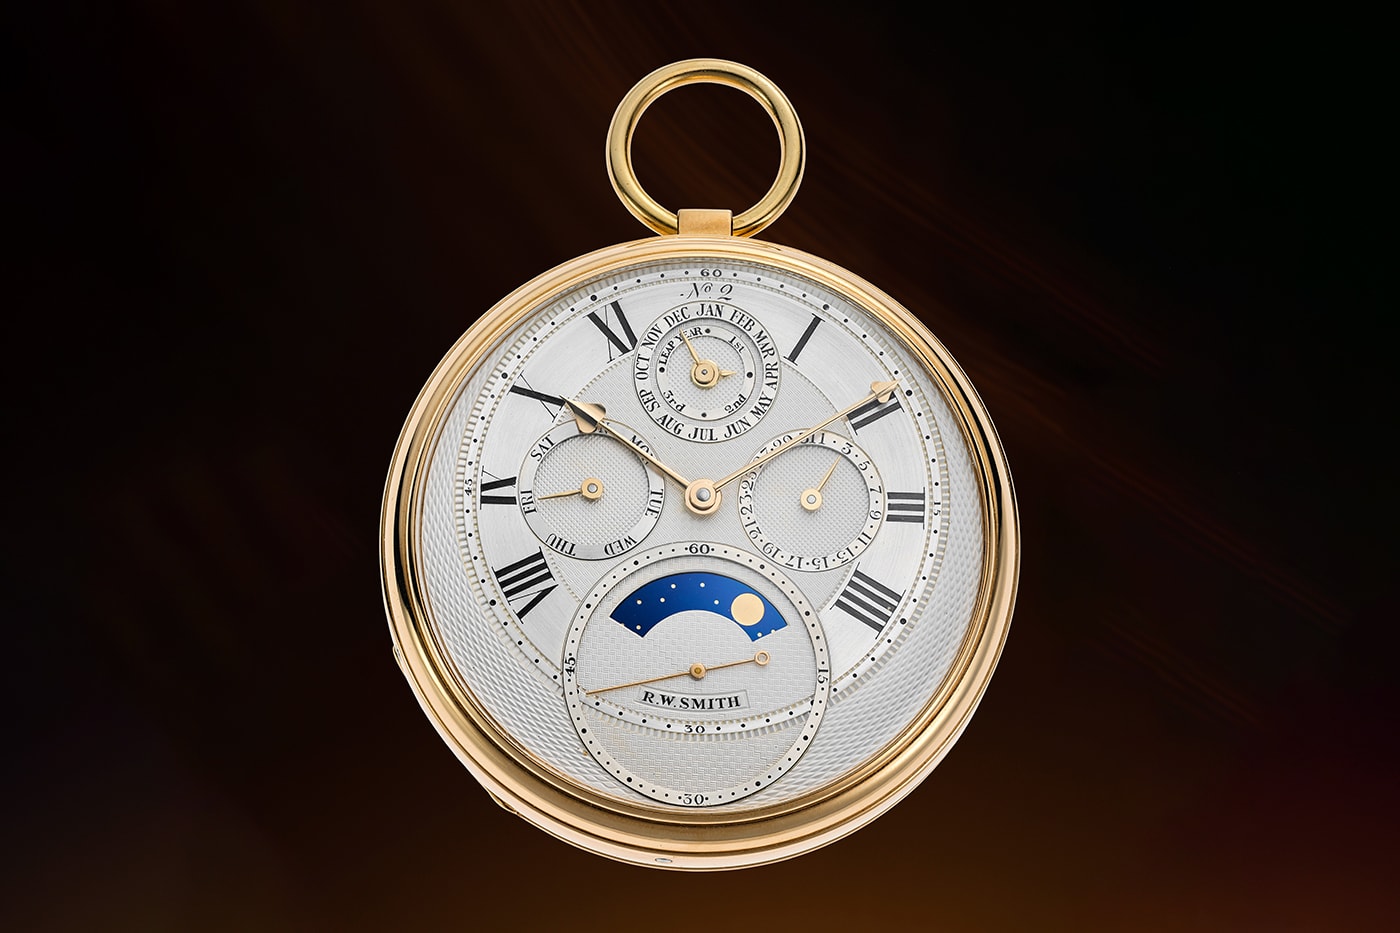 Phillips Roger Smith Pocket Watch Number Two New York Watch Auction: EIGHT